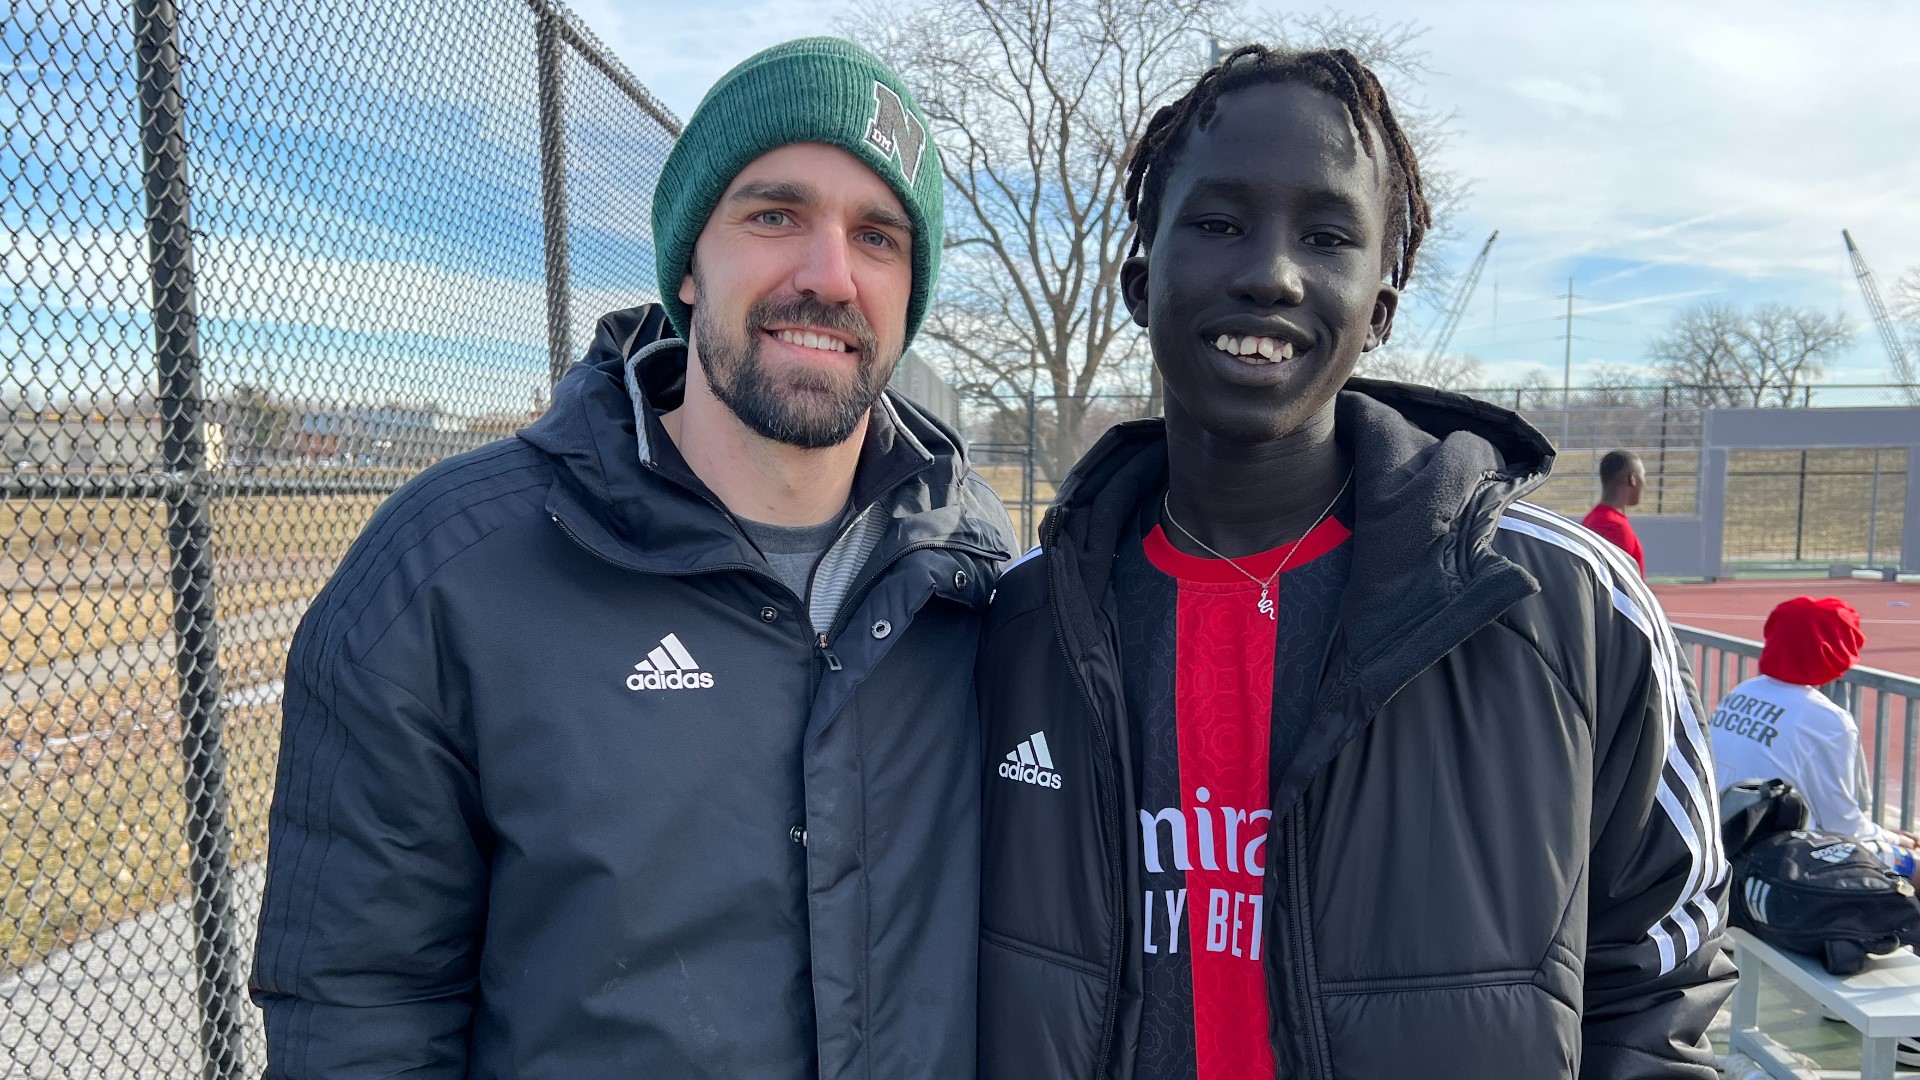 Des Moines North high schooler MJ Mangok and his soccer coach, Leland Schipper, share how they gained new perspective after spending an entire day together.